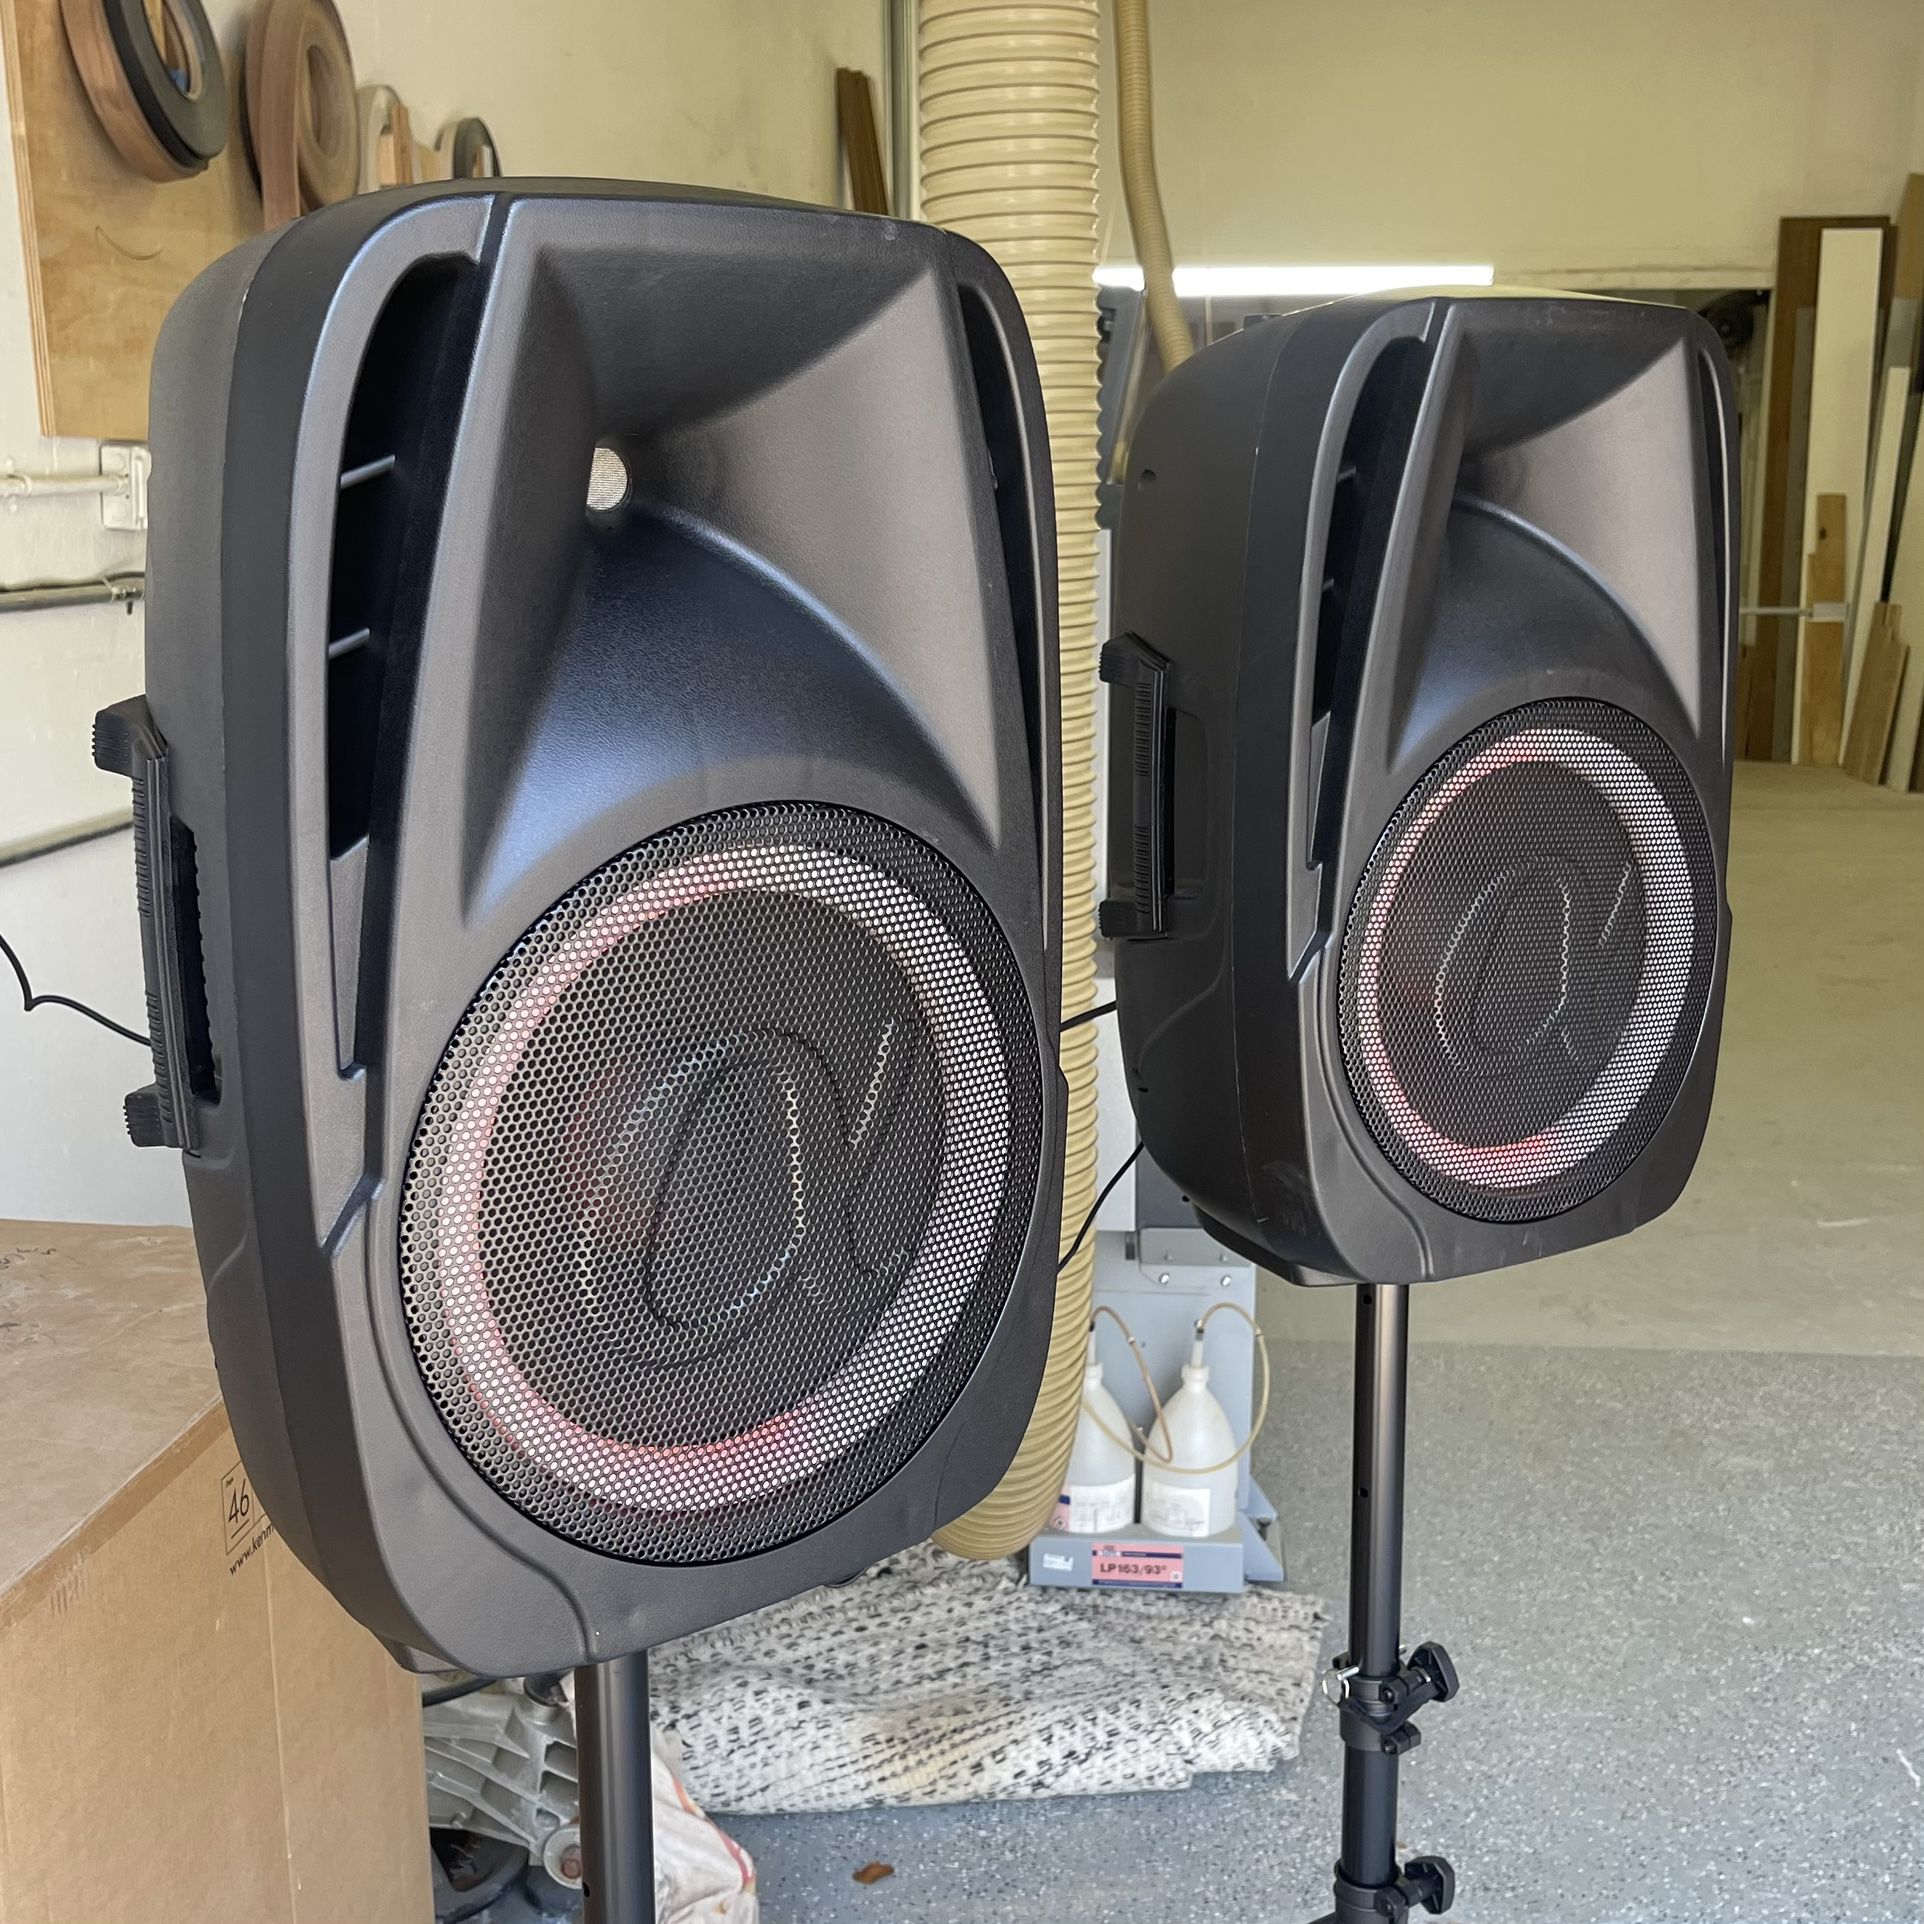 NEW Set of two 12” Speakers Brand New!! Everything Included 